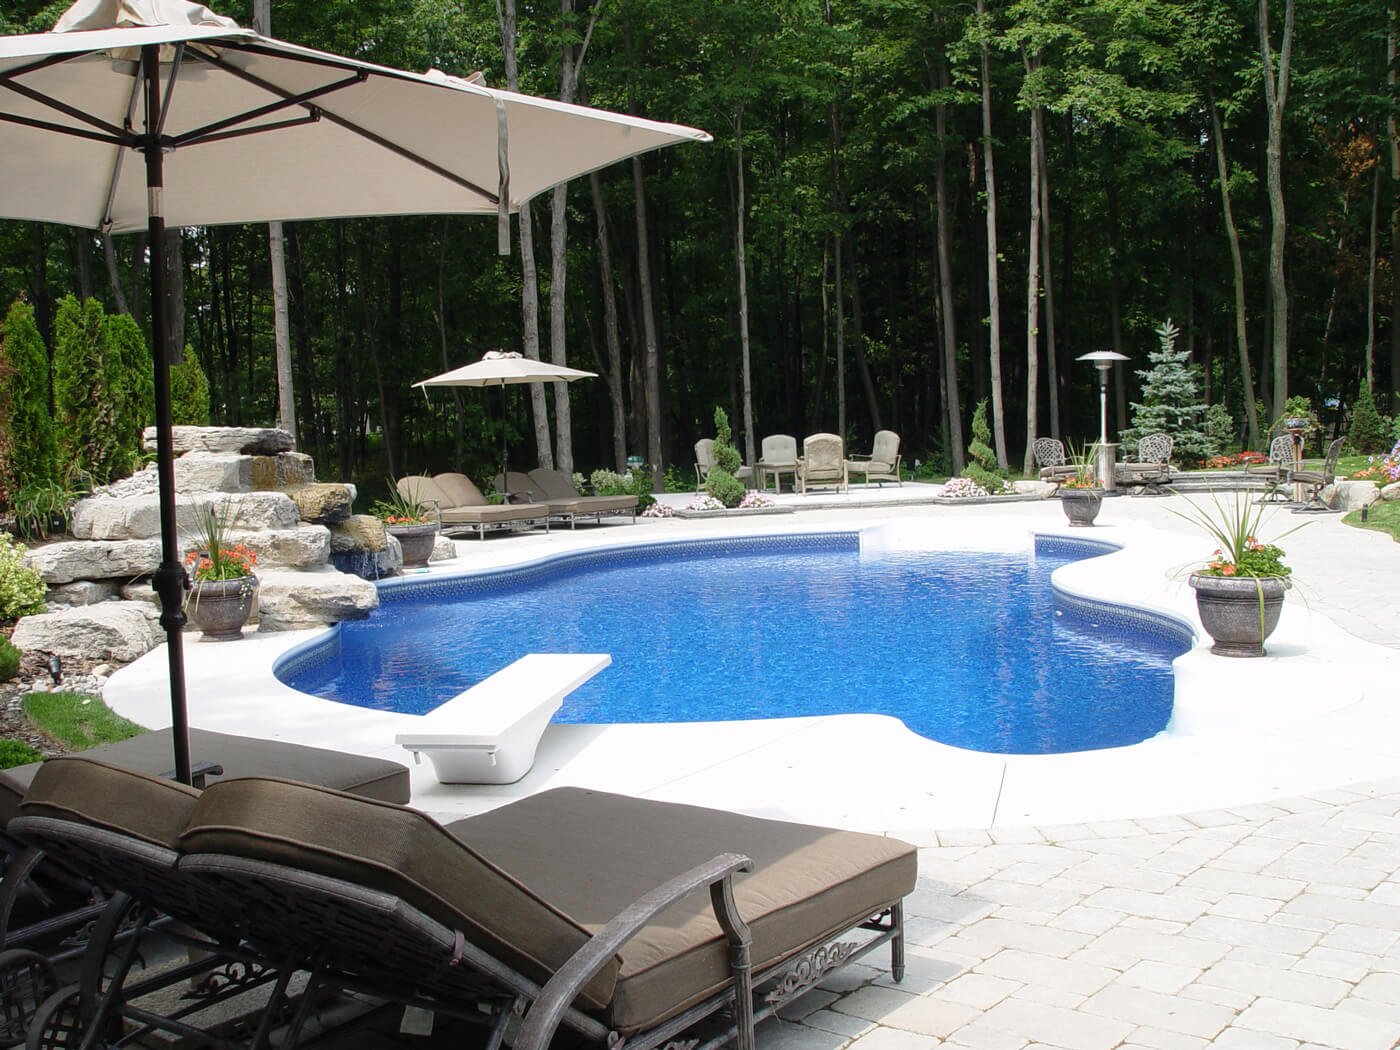 Backyard renovation with swimming pool, pool accessories, diving board and outdoor living furniture & accessories, built & sourced from Seaway Pools